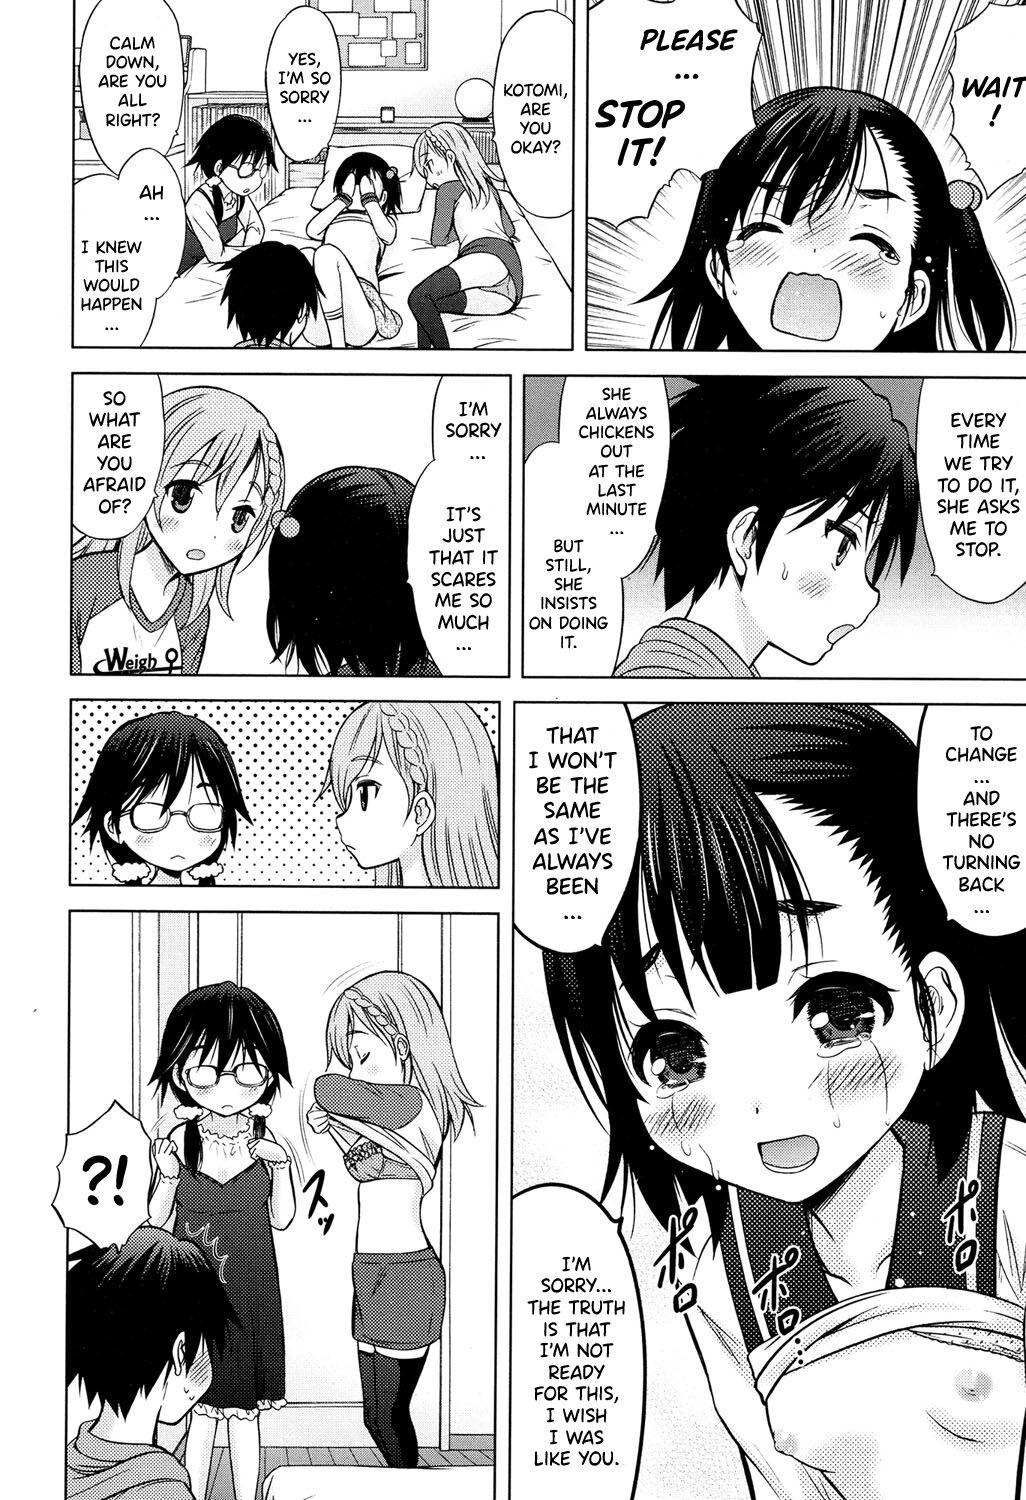 Hot Wife Umeyo! Fuyaseyo! | Breed! Reproduce! Chica - Page 10